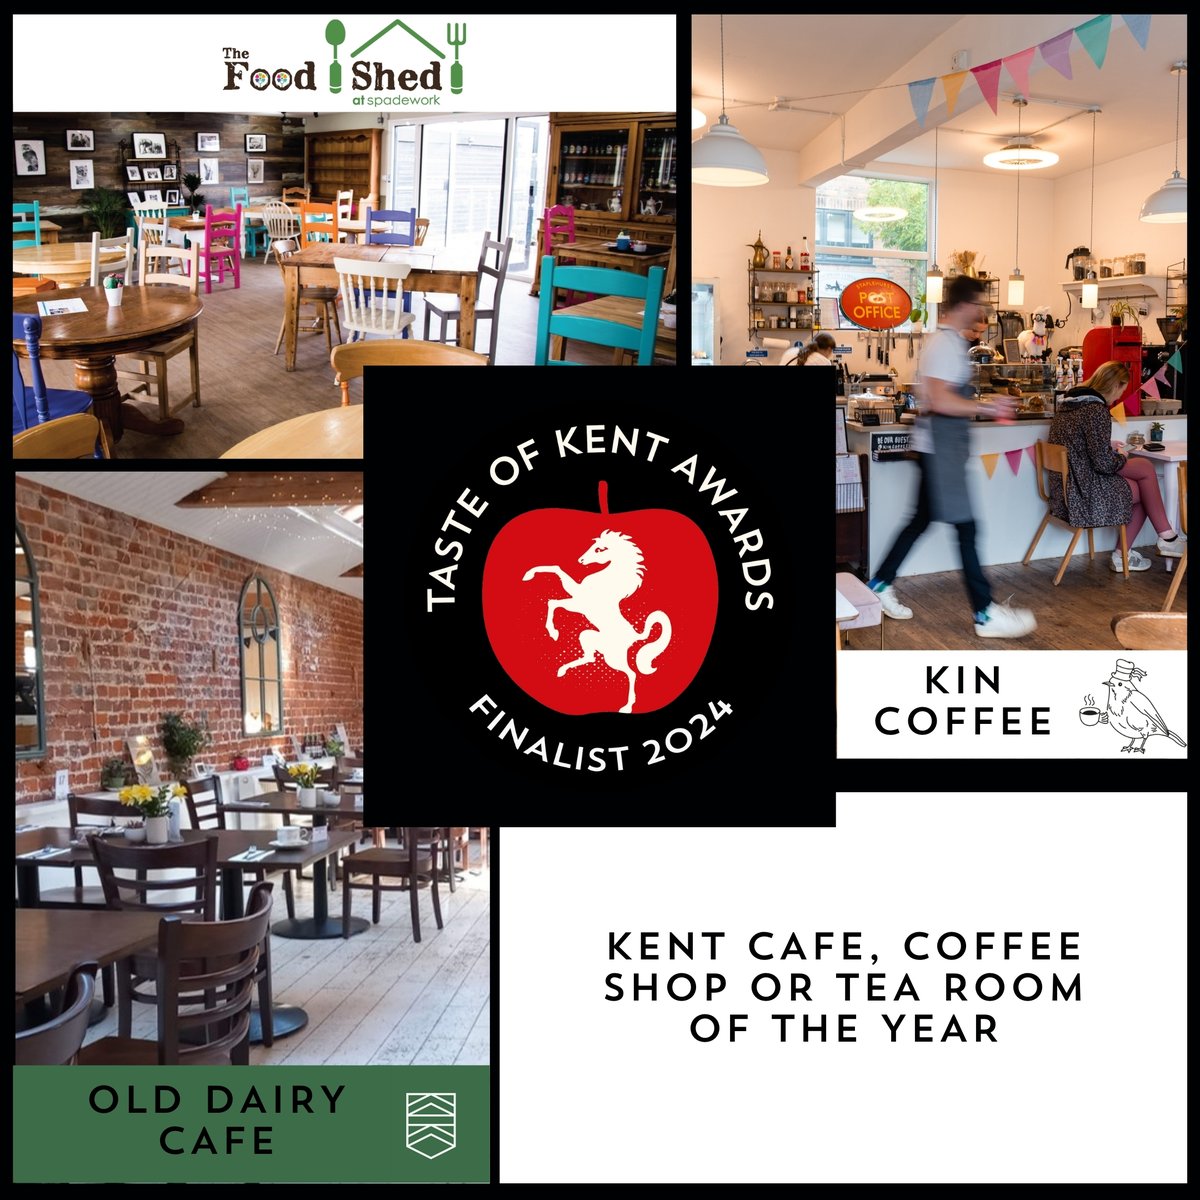 Kent Café, Coffee Shop or Tea Room of the Year The finalists are: The Food Shed Café at @SpadeworkOffham @KinCoffeeUK, Staplehurst Old Dairy café,@GoodnestonePark Discover the other finalists & see them at the Food & Drink festival: ow.ly/FiCM30sCtFg